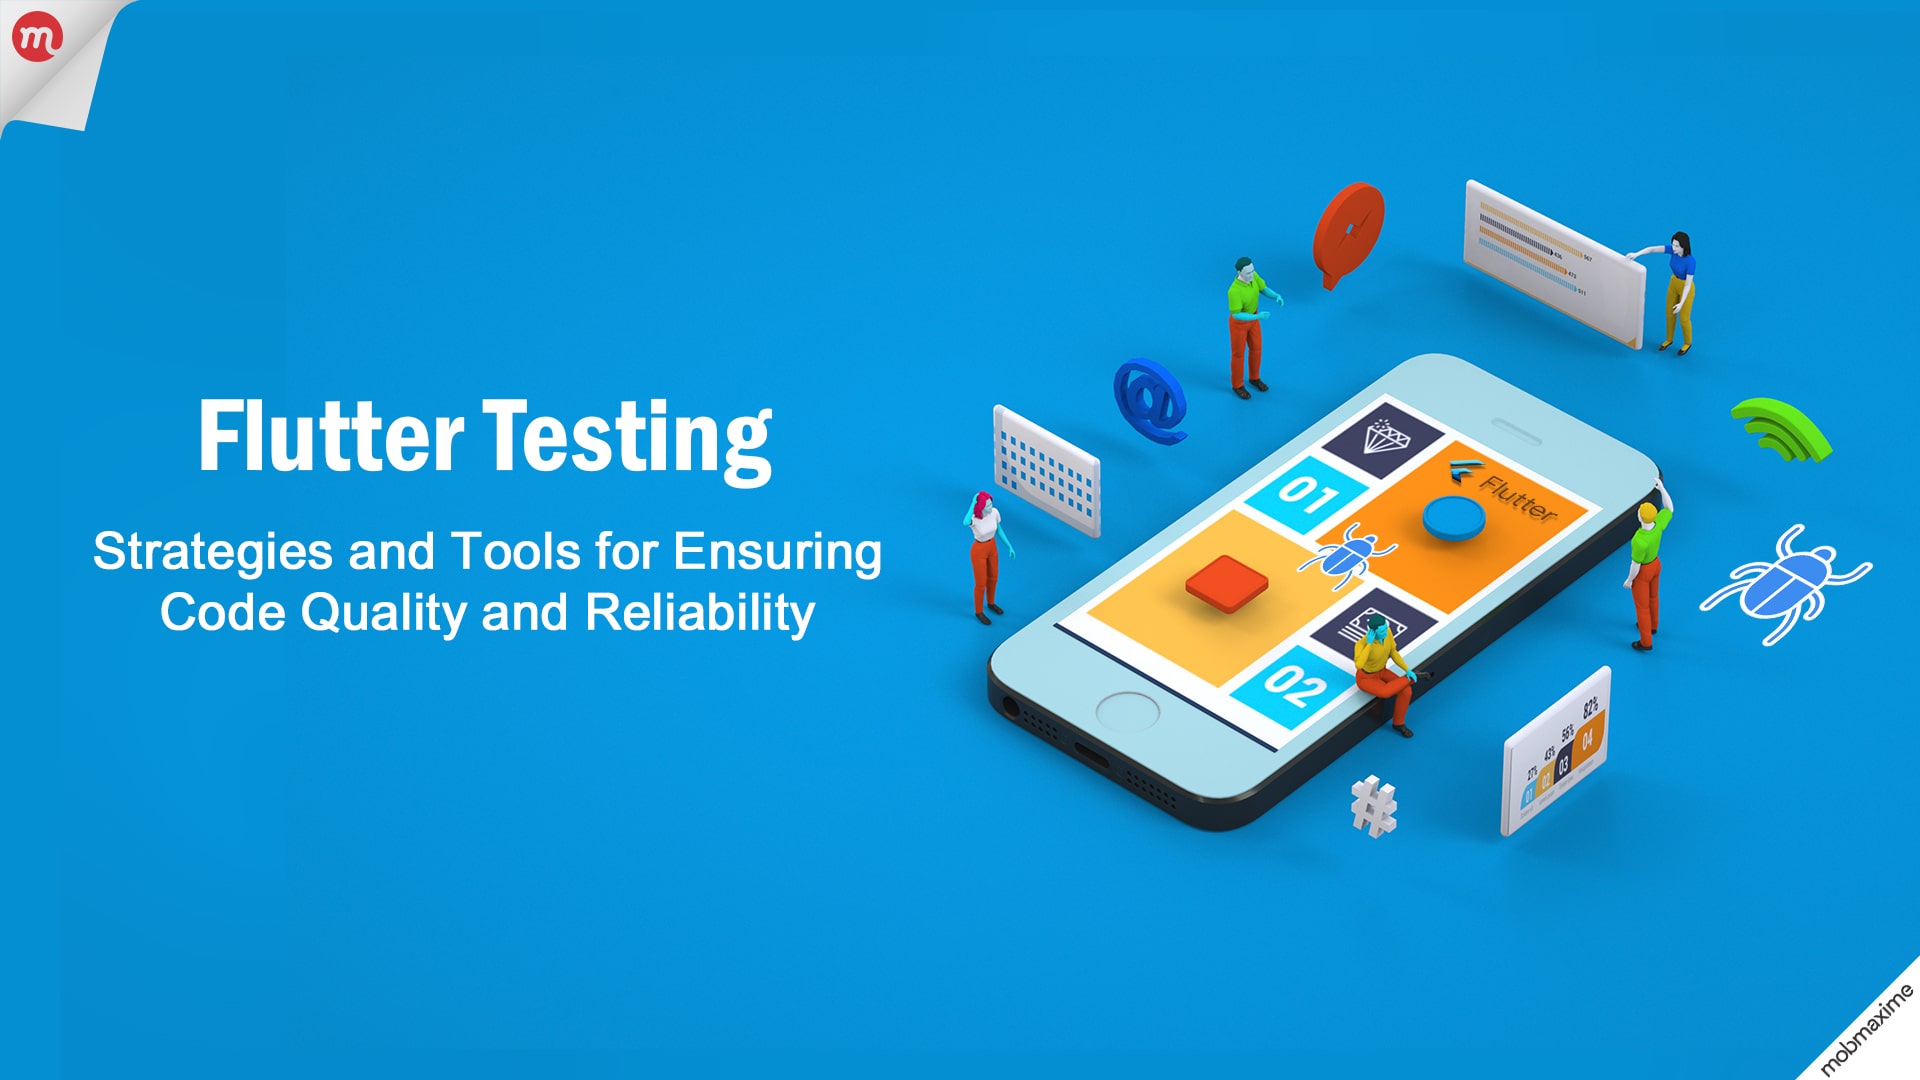 Flutter Testing: Strategies and Tools for Ensuring Code Quality and Reliability